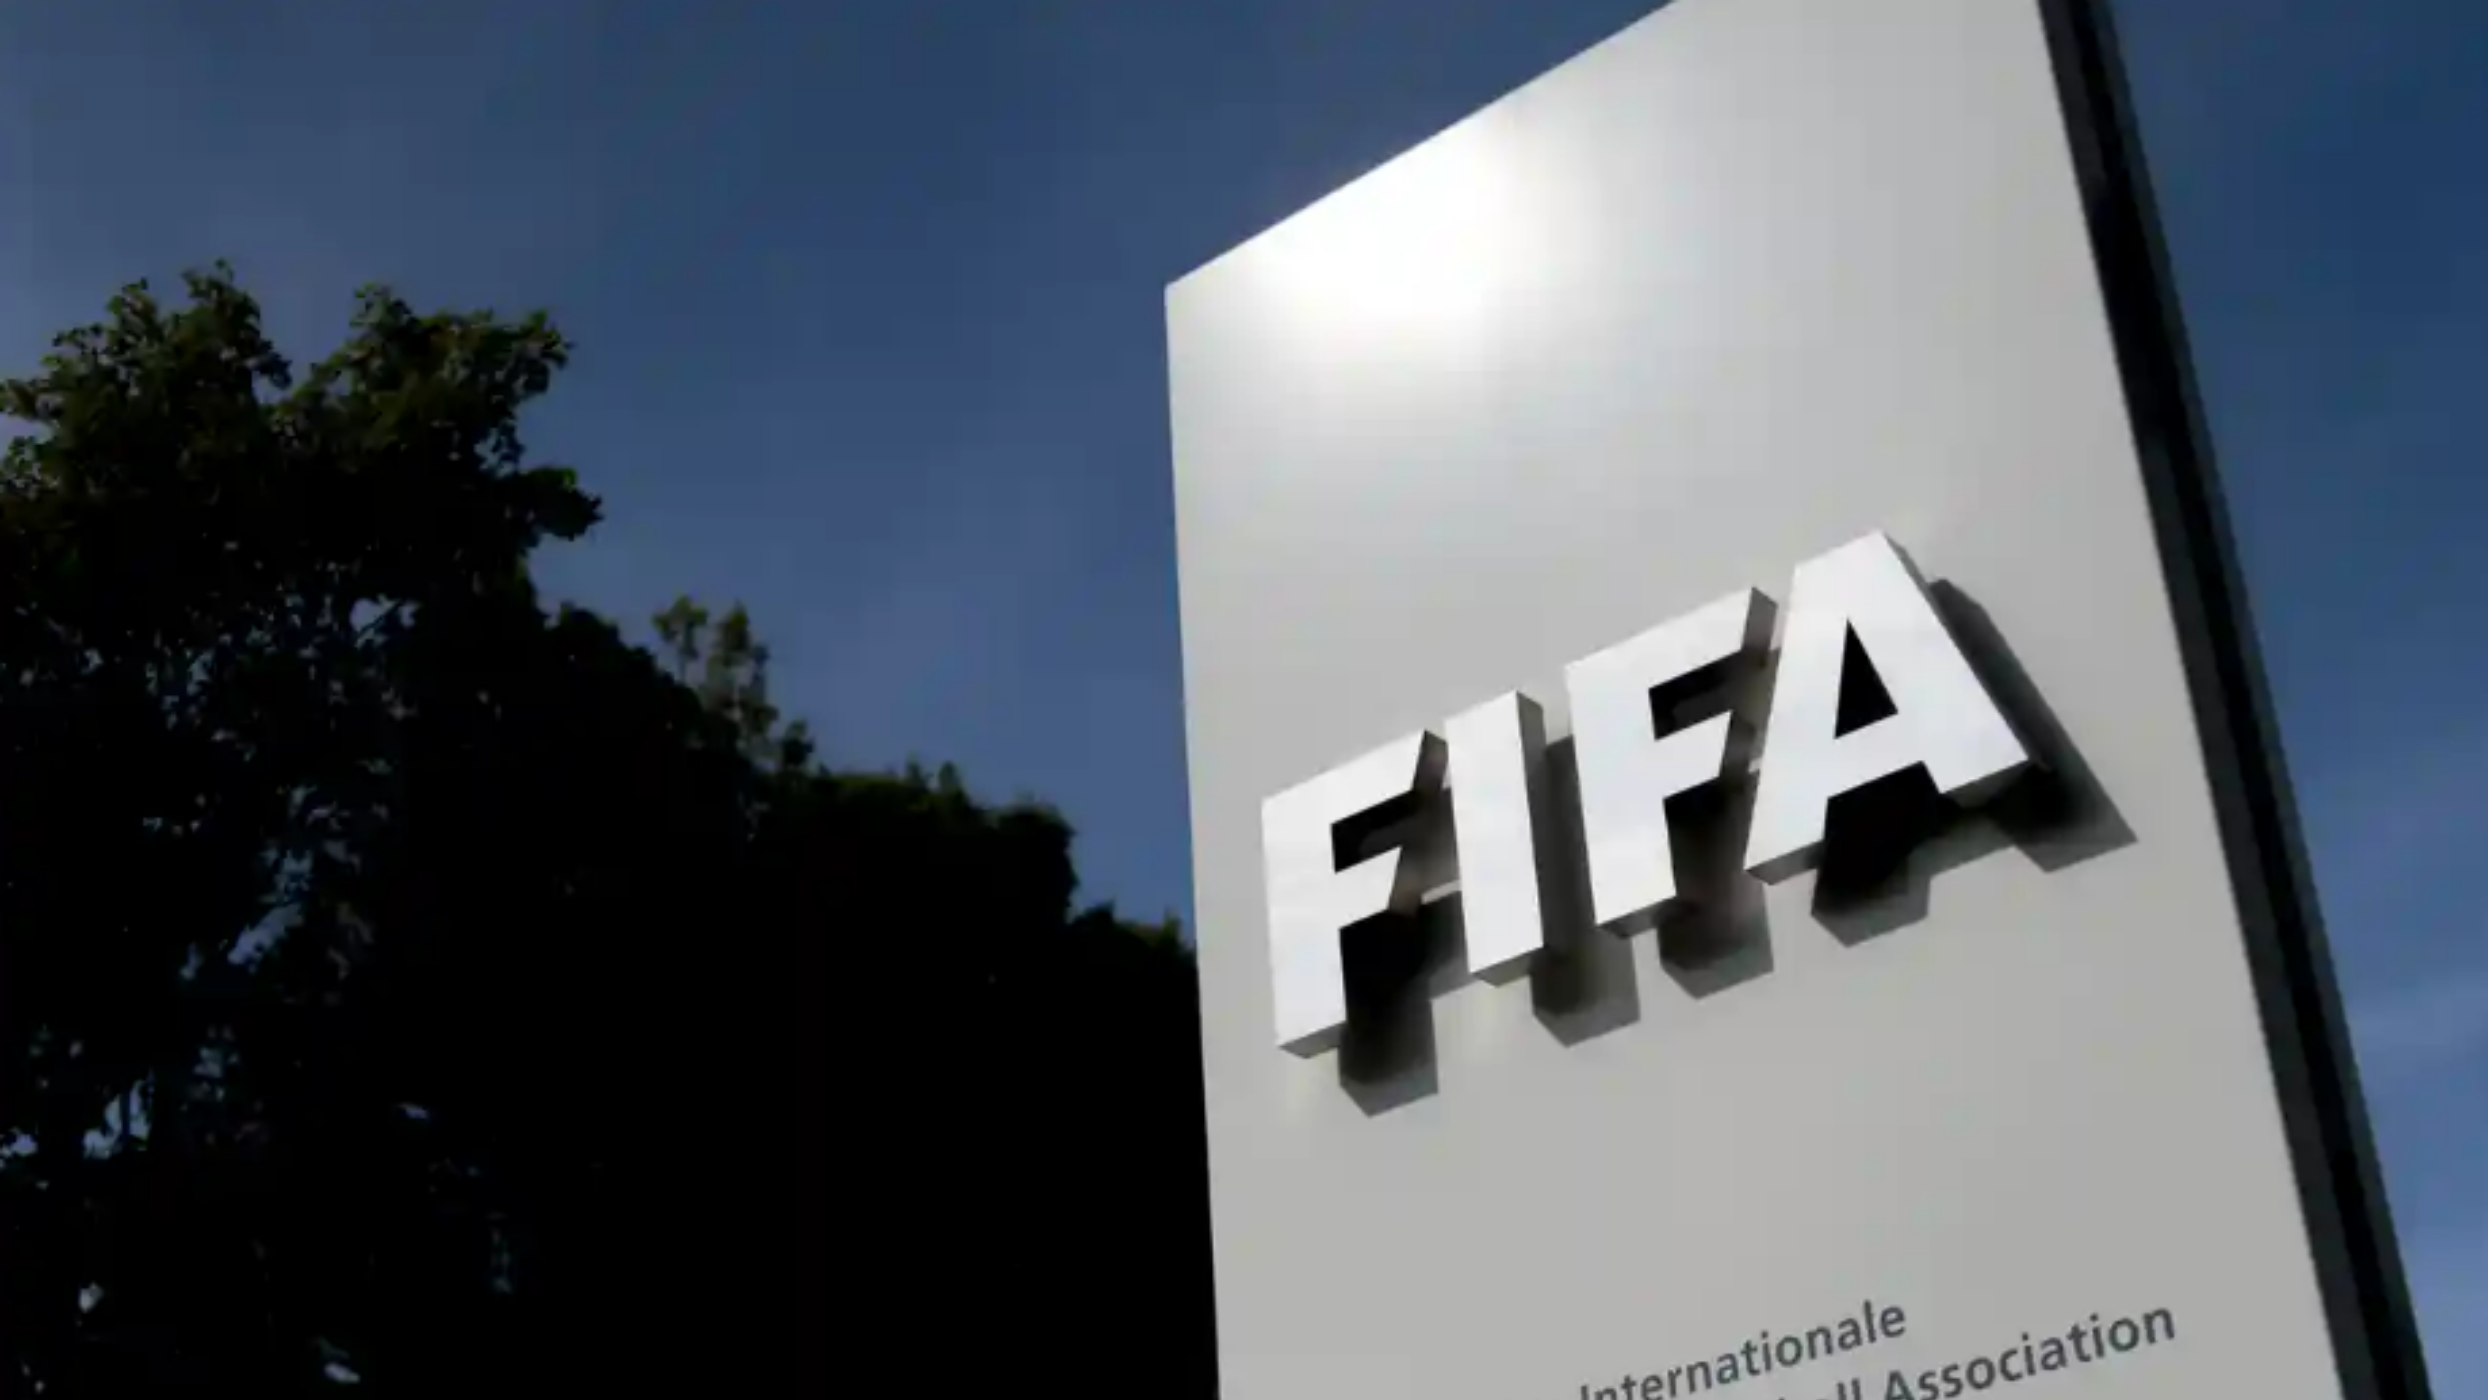 Fifa criticised after clearing women’s football coach of sexual harassment